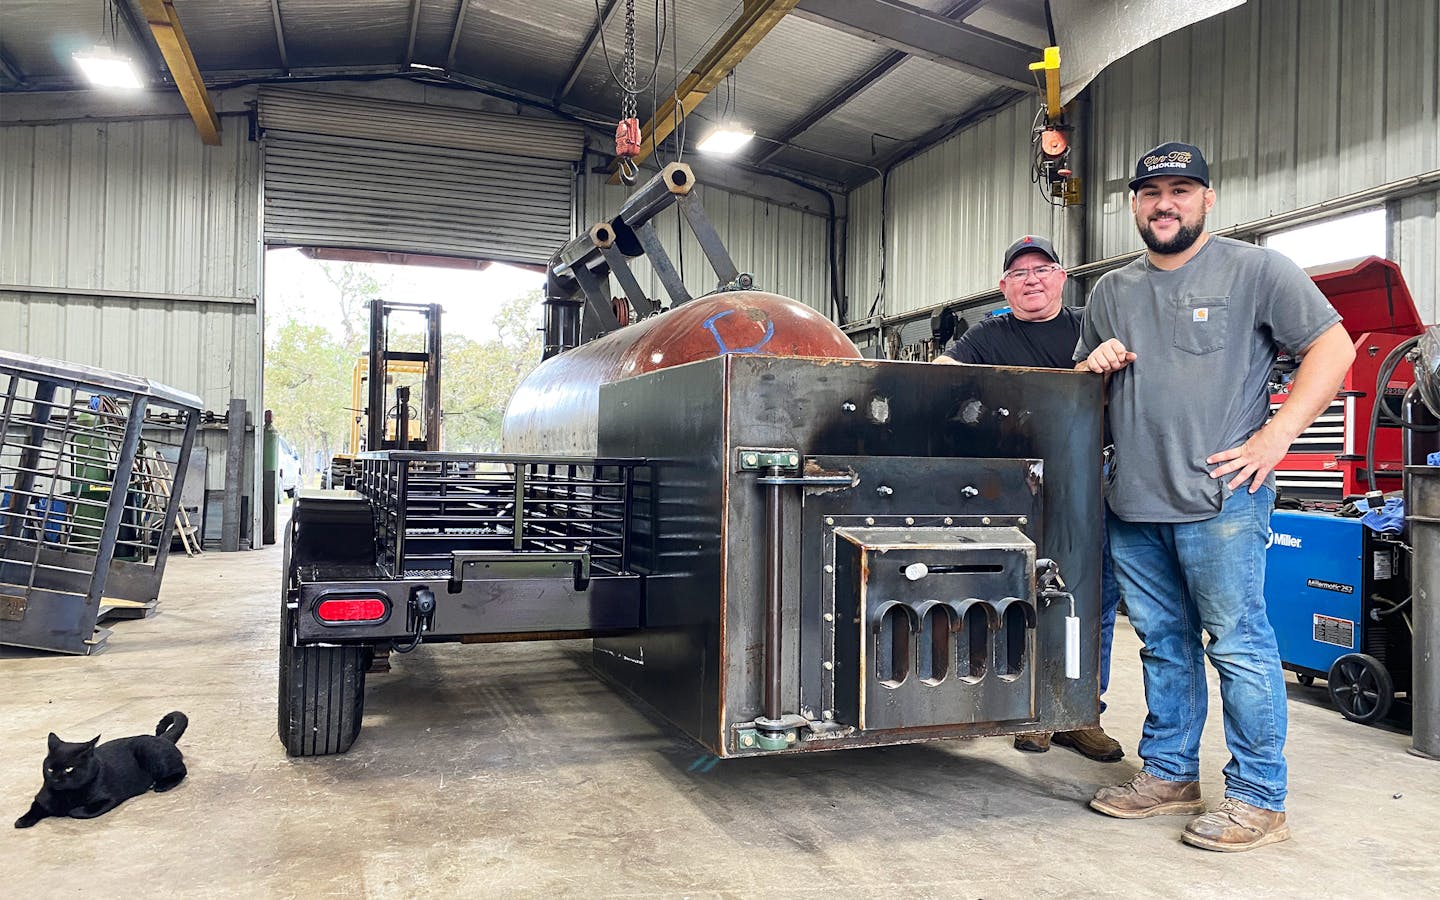 https://img.texasmonthly.com/2022/11/cen-tex-smokers-luling.jpg?auto=compress&crop=faces&fit=crop&fm=jpg&h=900&ixlib=php-3.3.1&q=45&w=1600